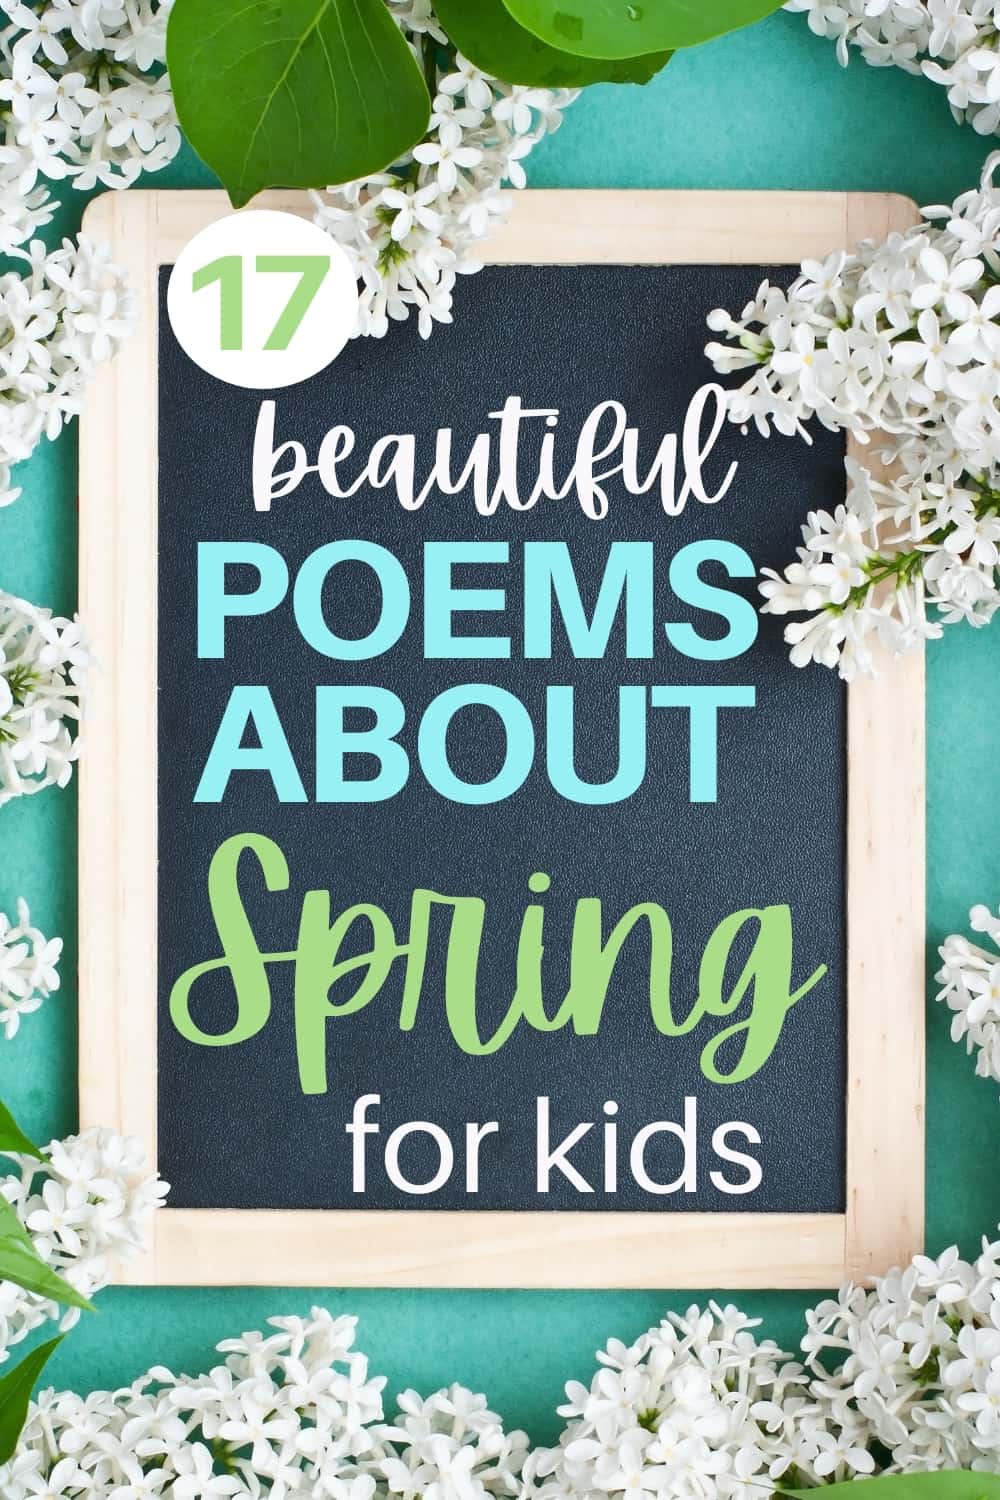 17 beautiful poems about spring for kids